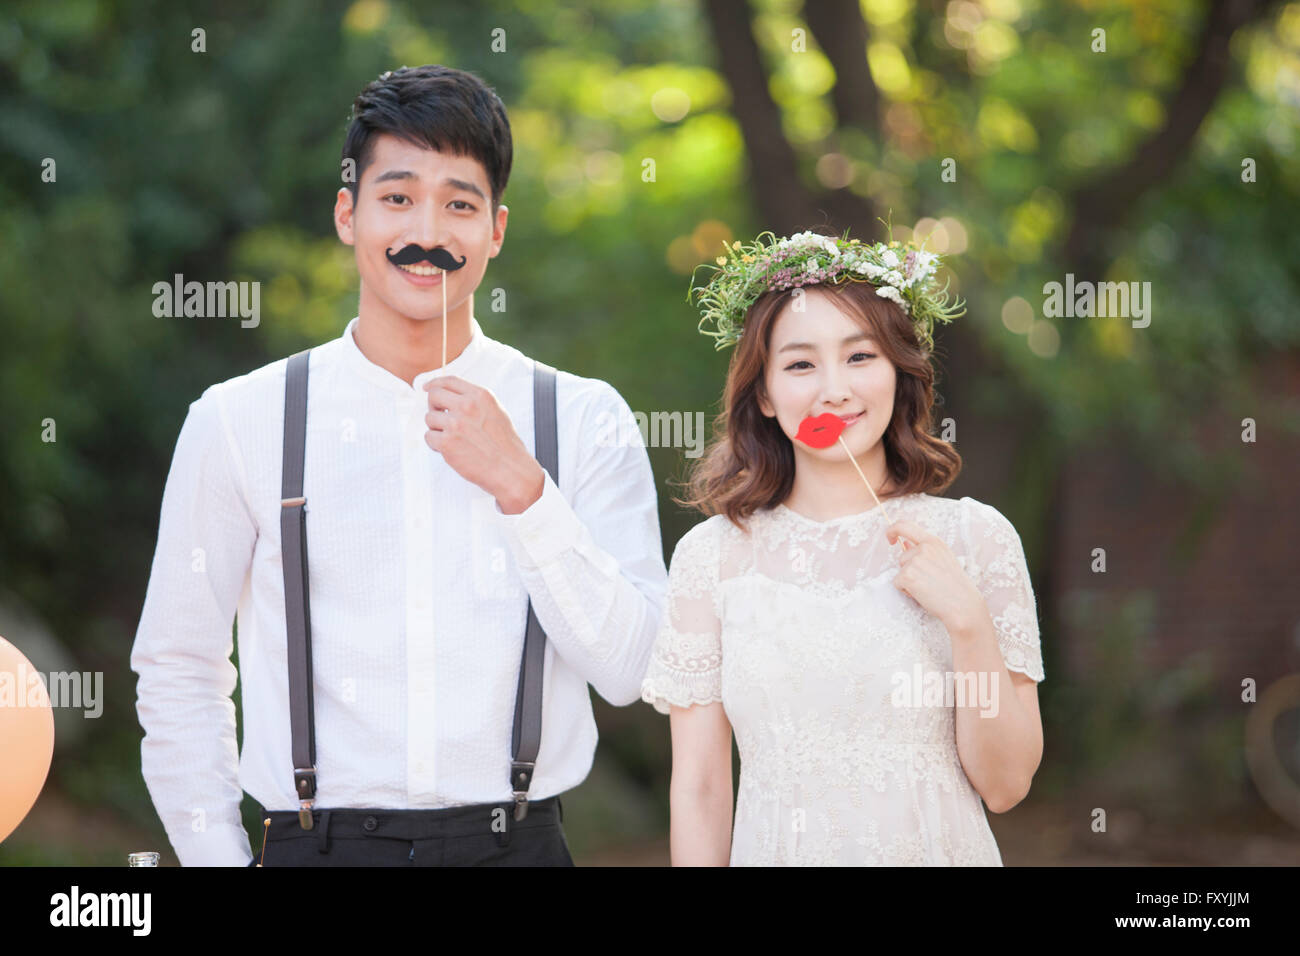 Bride and bridegroom together outside holding a fake mustache and fake lips Stock Photo